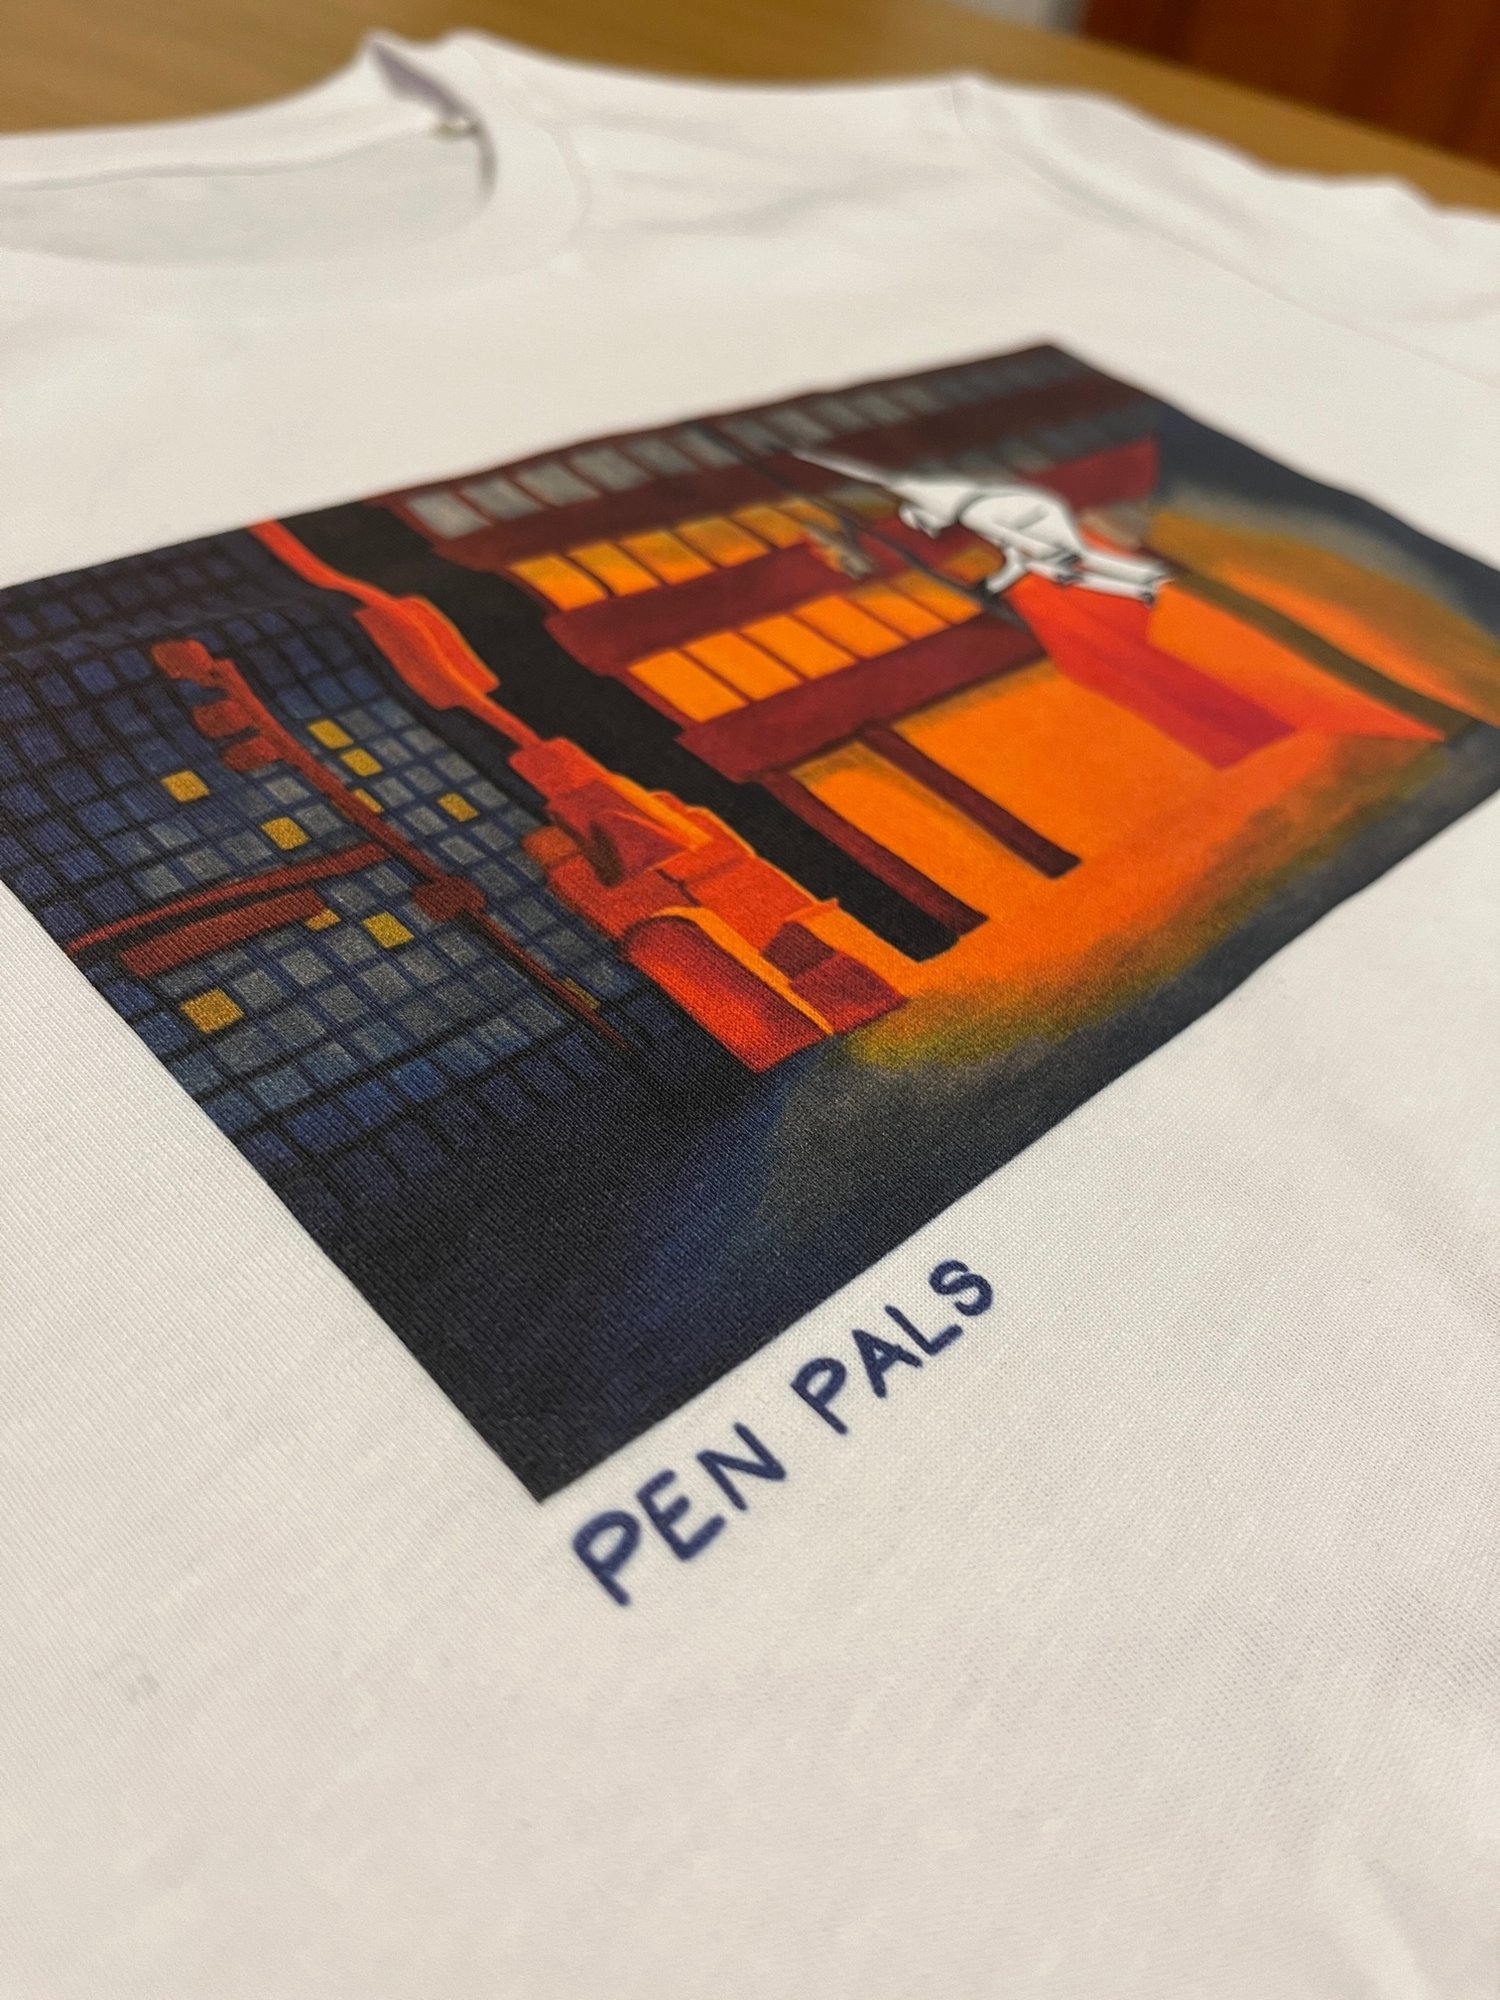 Image of Pen Pals - Tiago shirt (DTG printed) - charity fundraiser for PAPYRUS